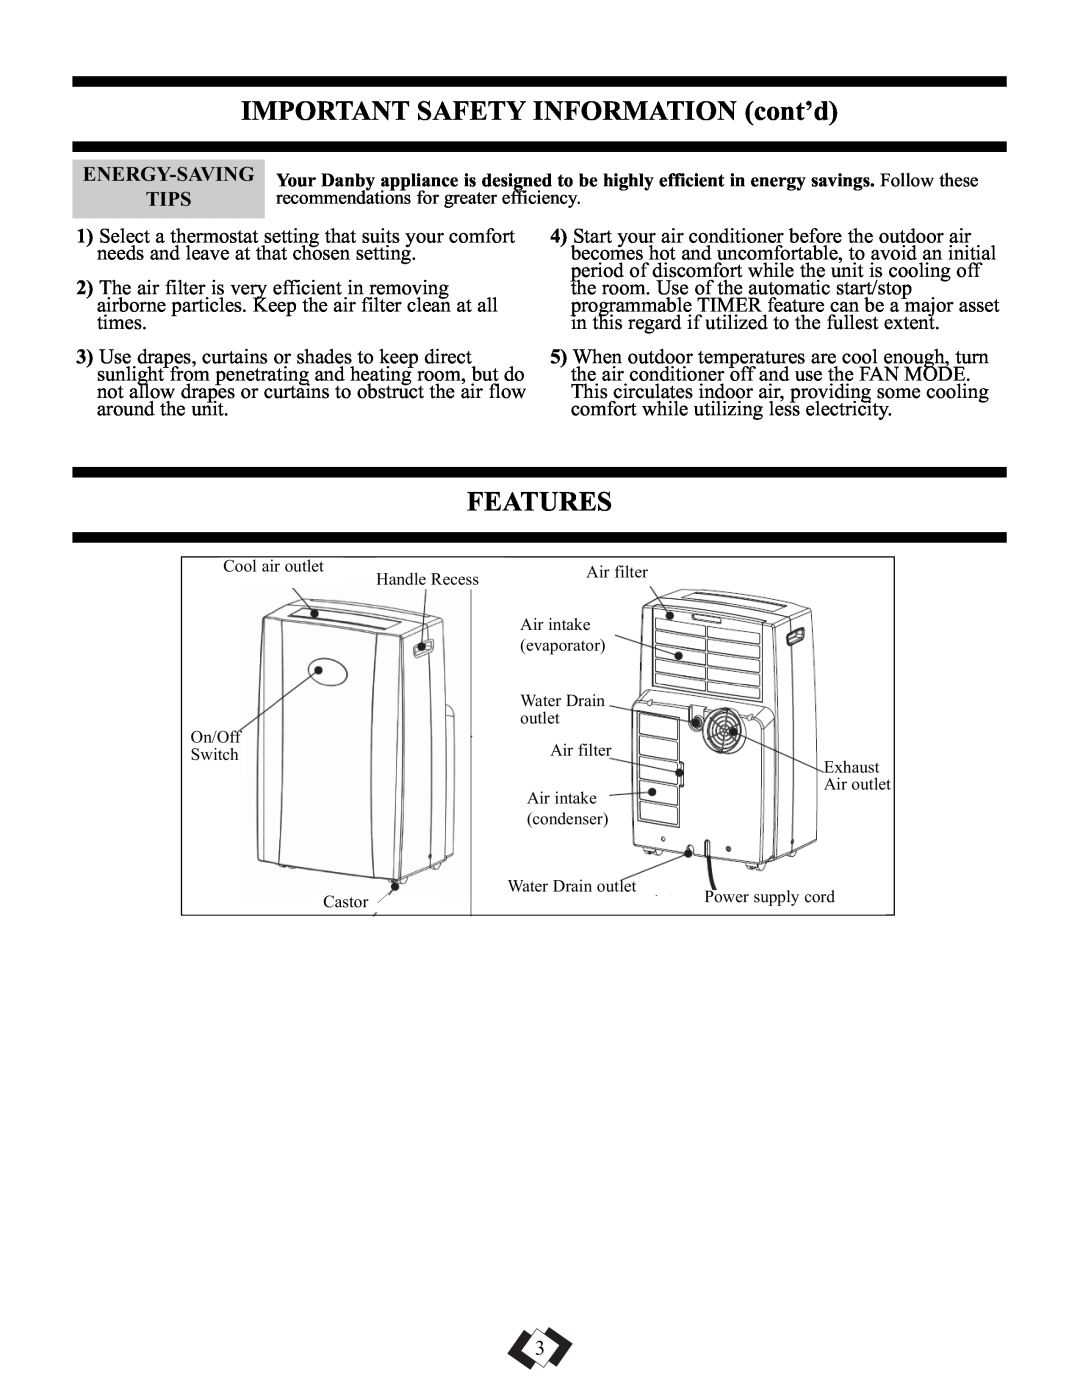 Danby DPAC5009 manual IMPORTANT SAFETY INFORMATION cont’d, Features, Energy-Saving, Tips 